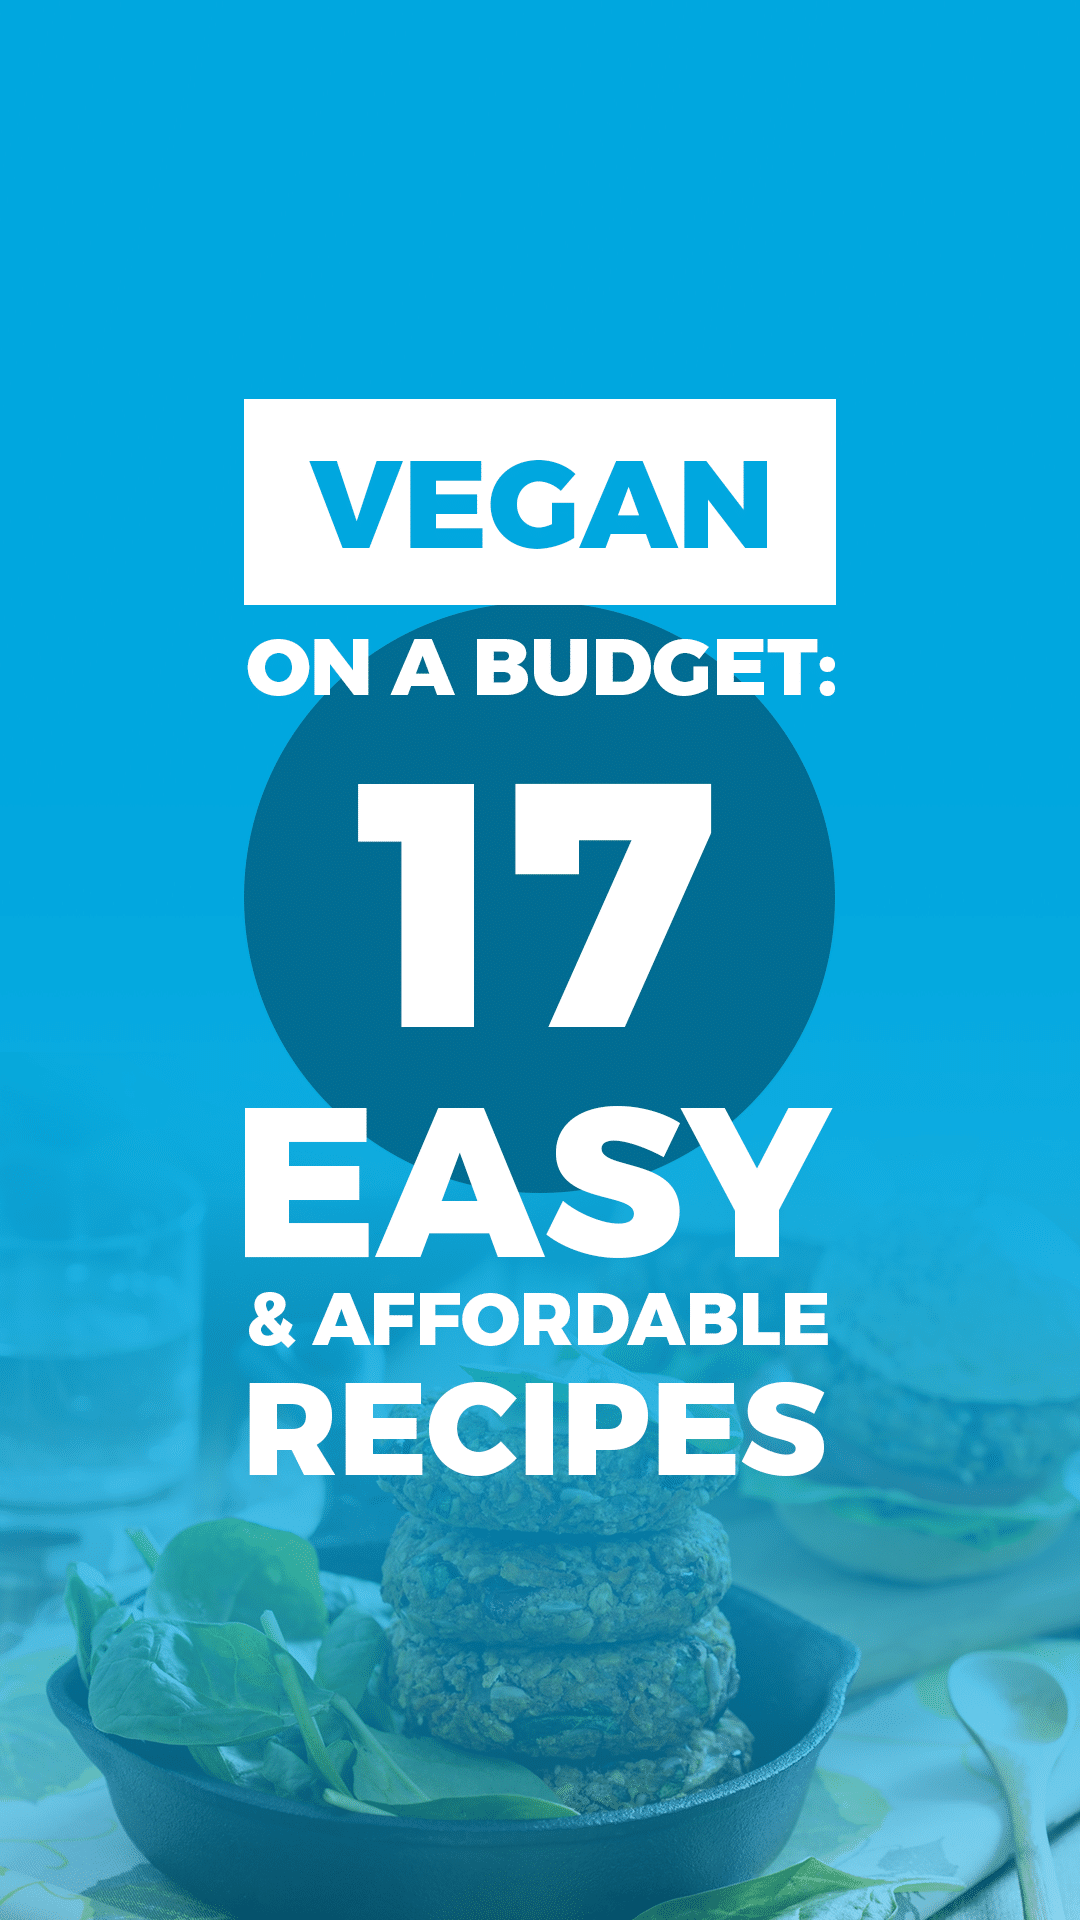 Vegan on a Budget: 17 Easy & Affordable Recipes